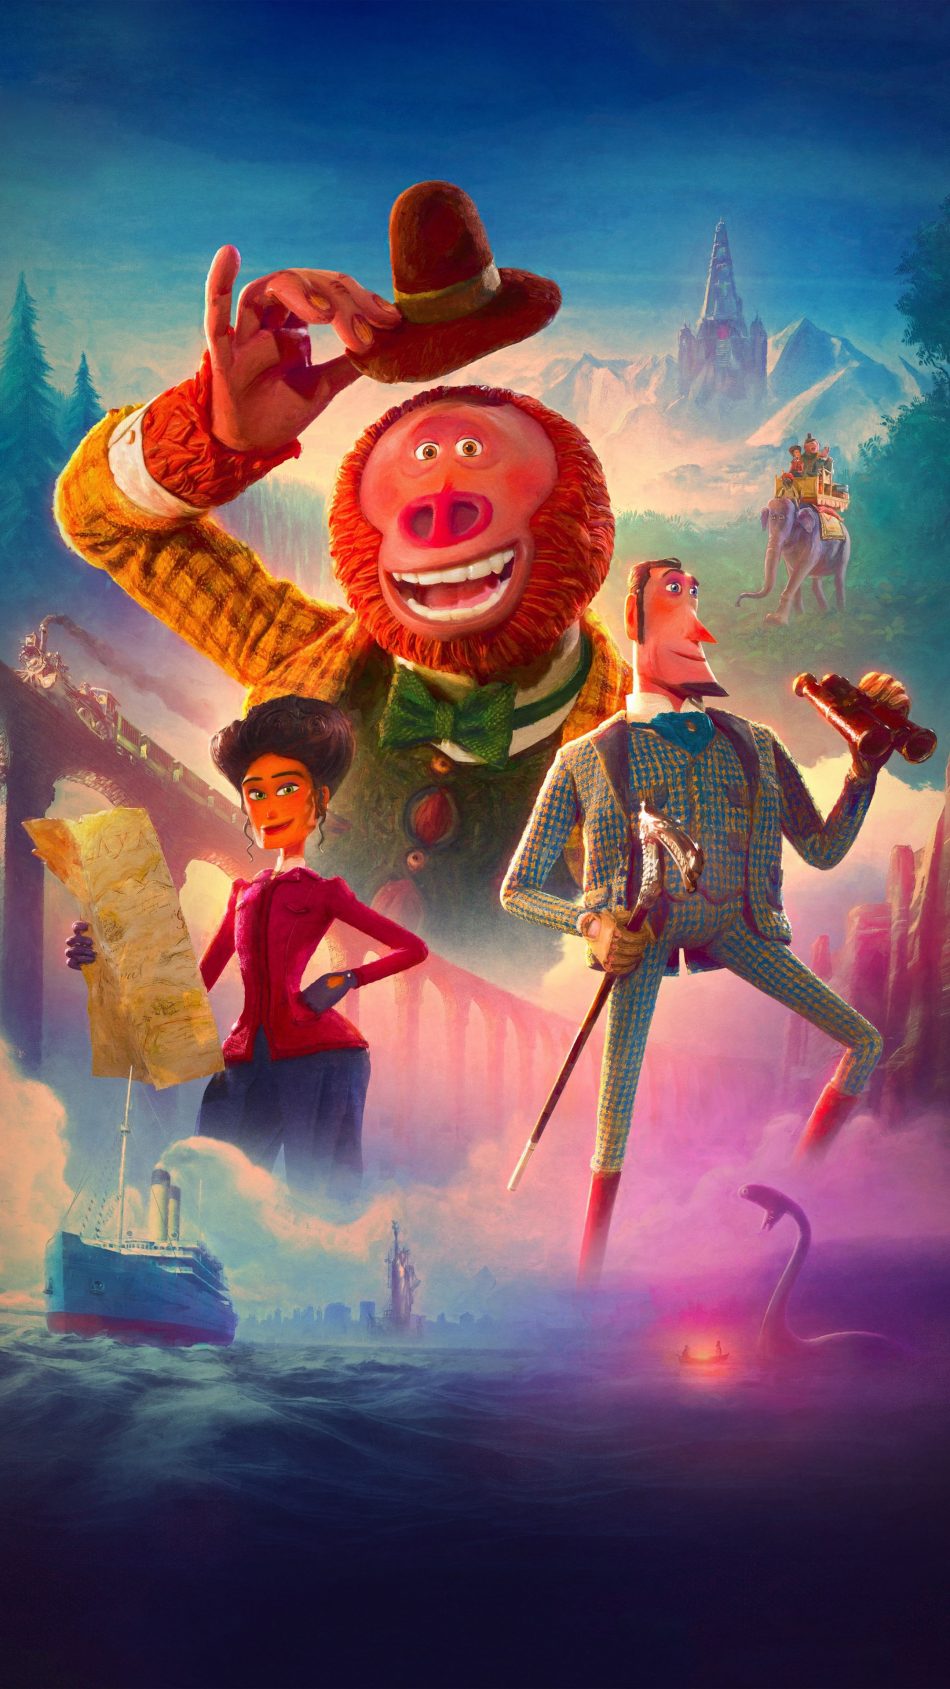 Missing Link 2019 Wallpapers